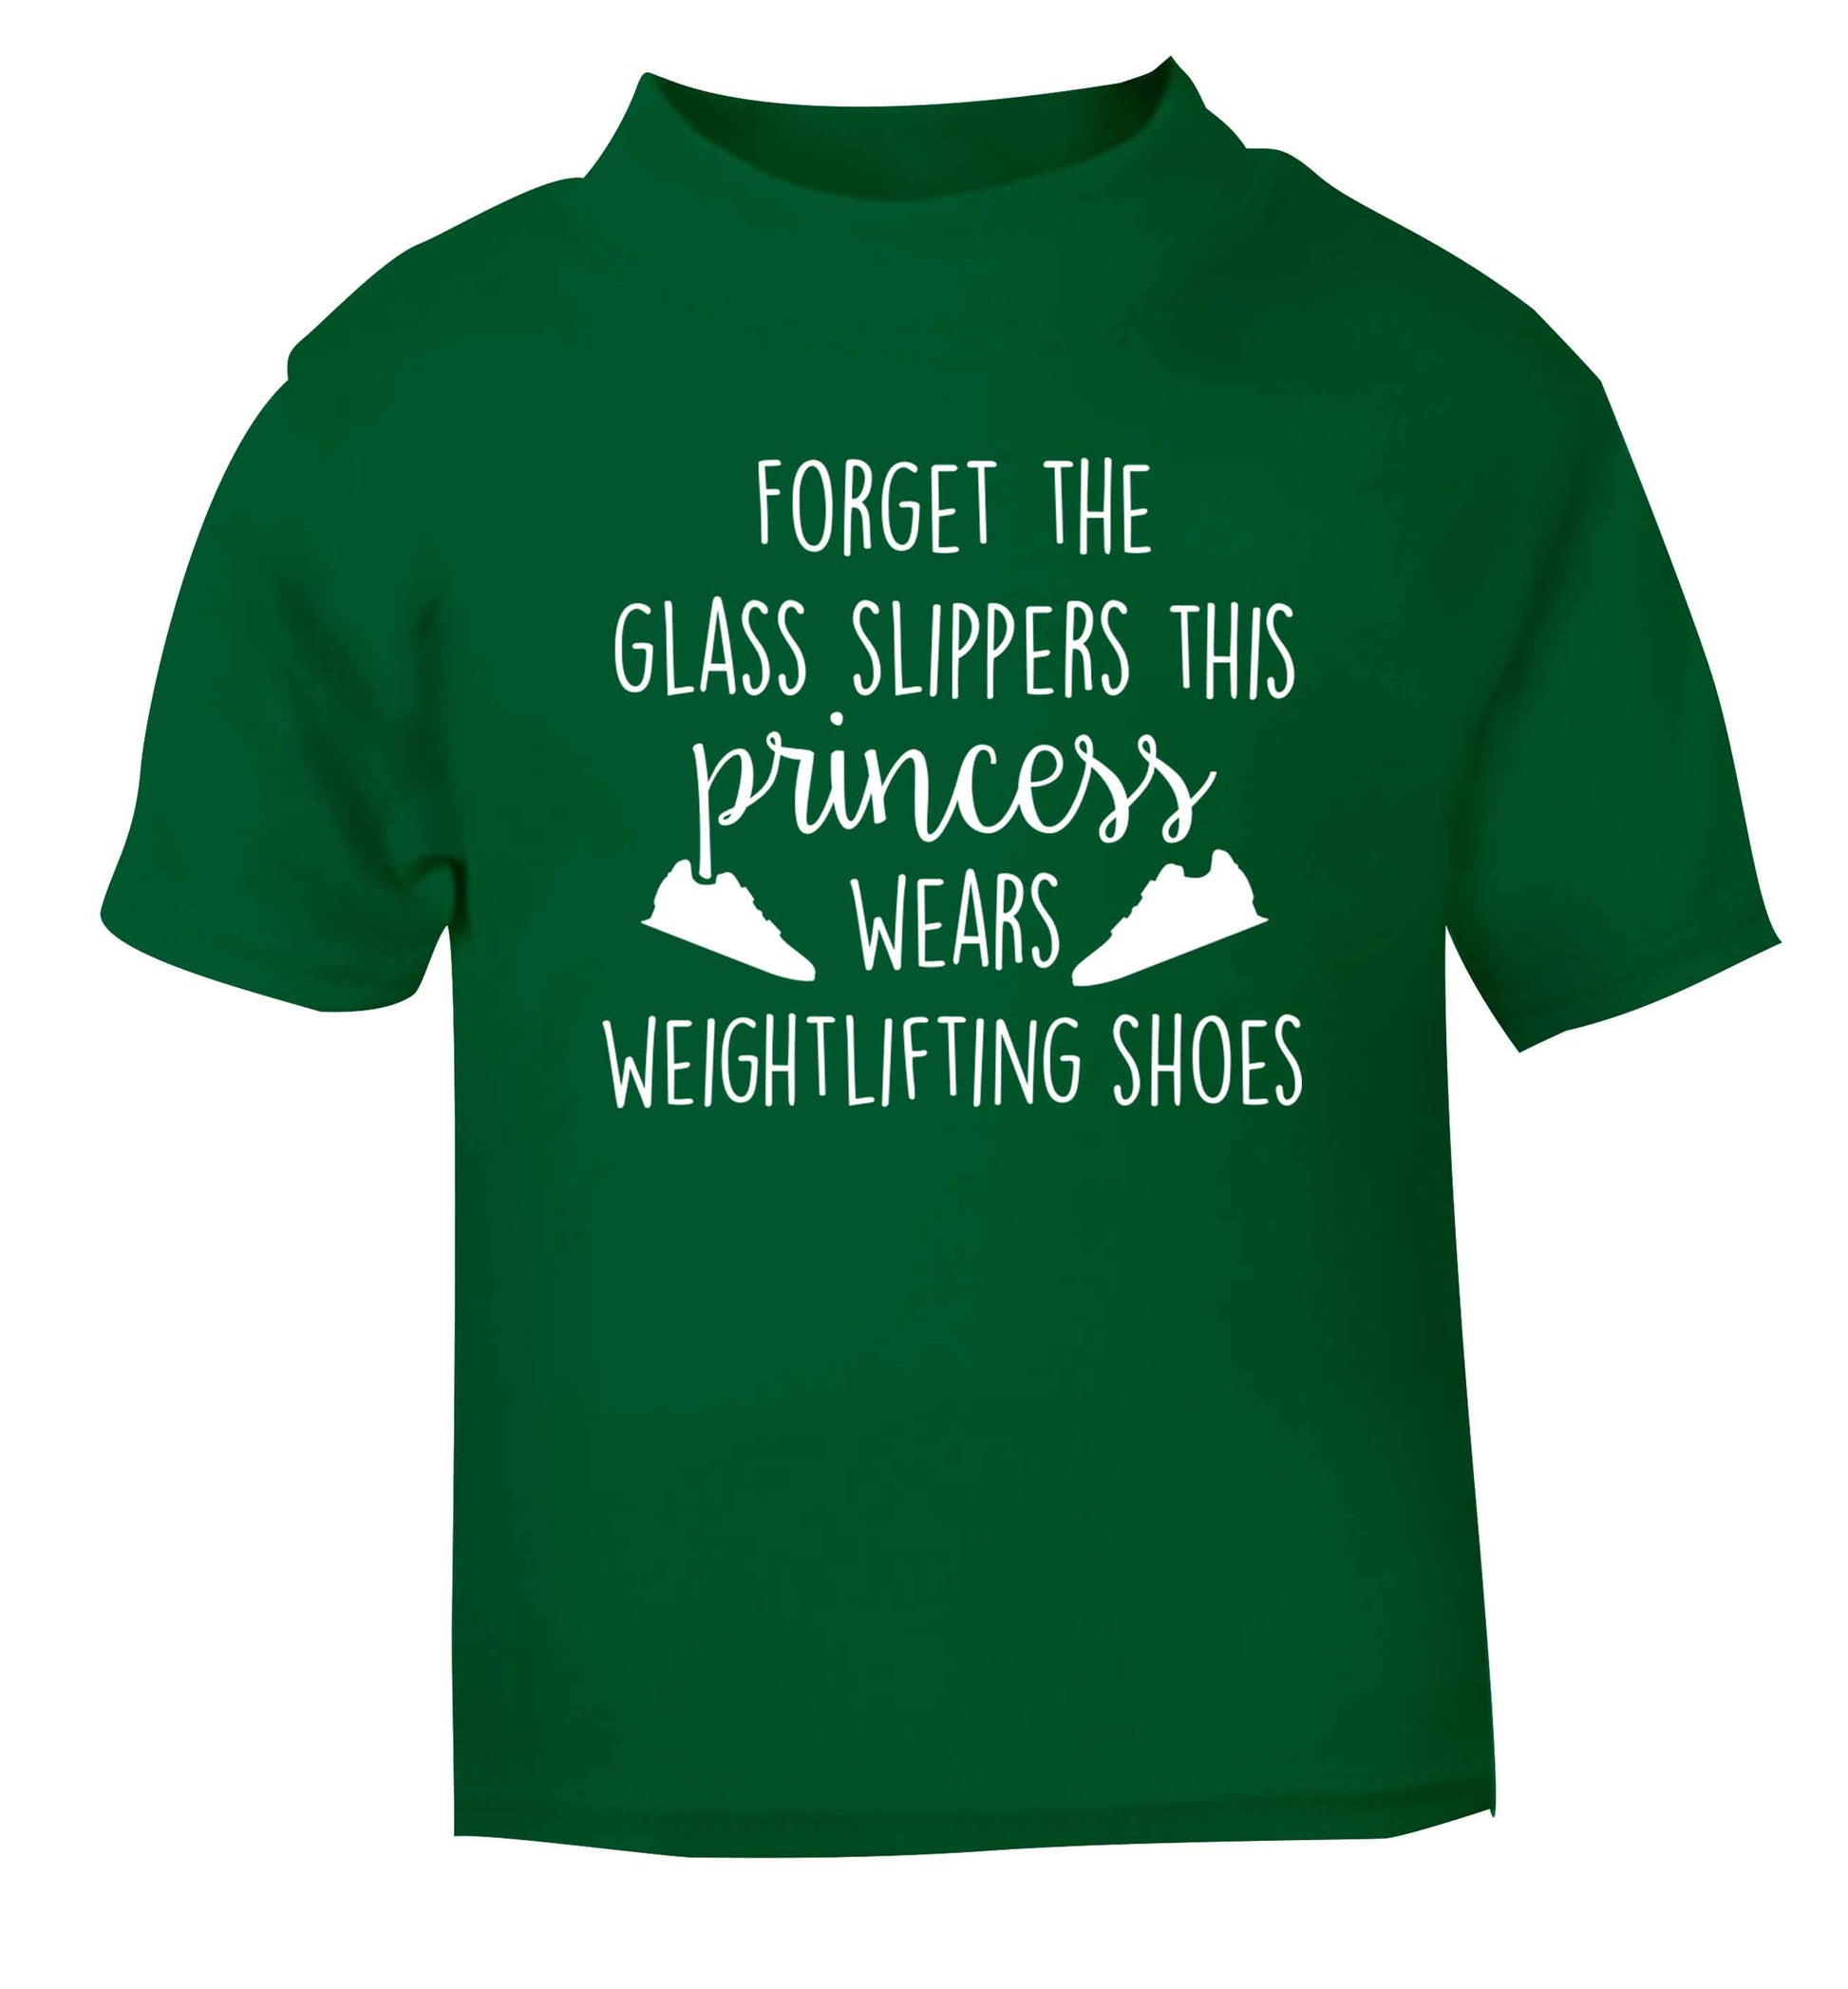 Forget the glass slippers this princess wears weightlifting shoes green Baby Toddler Tshirt 2 Years